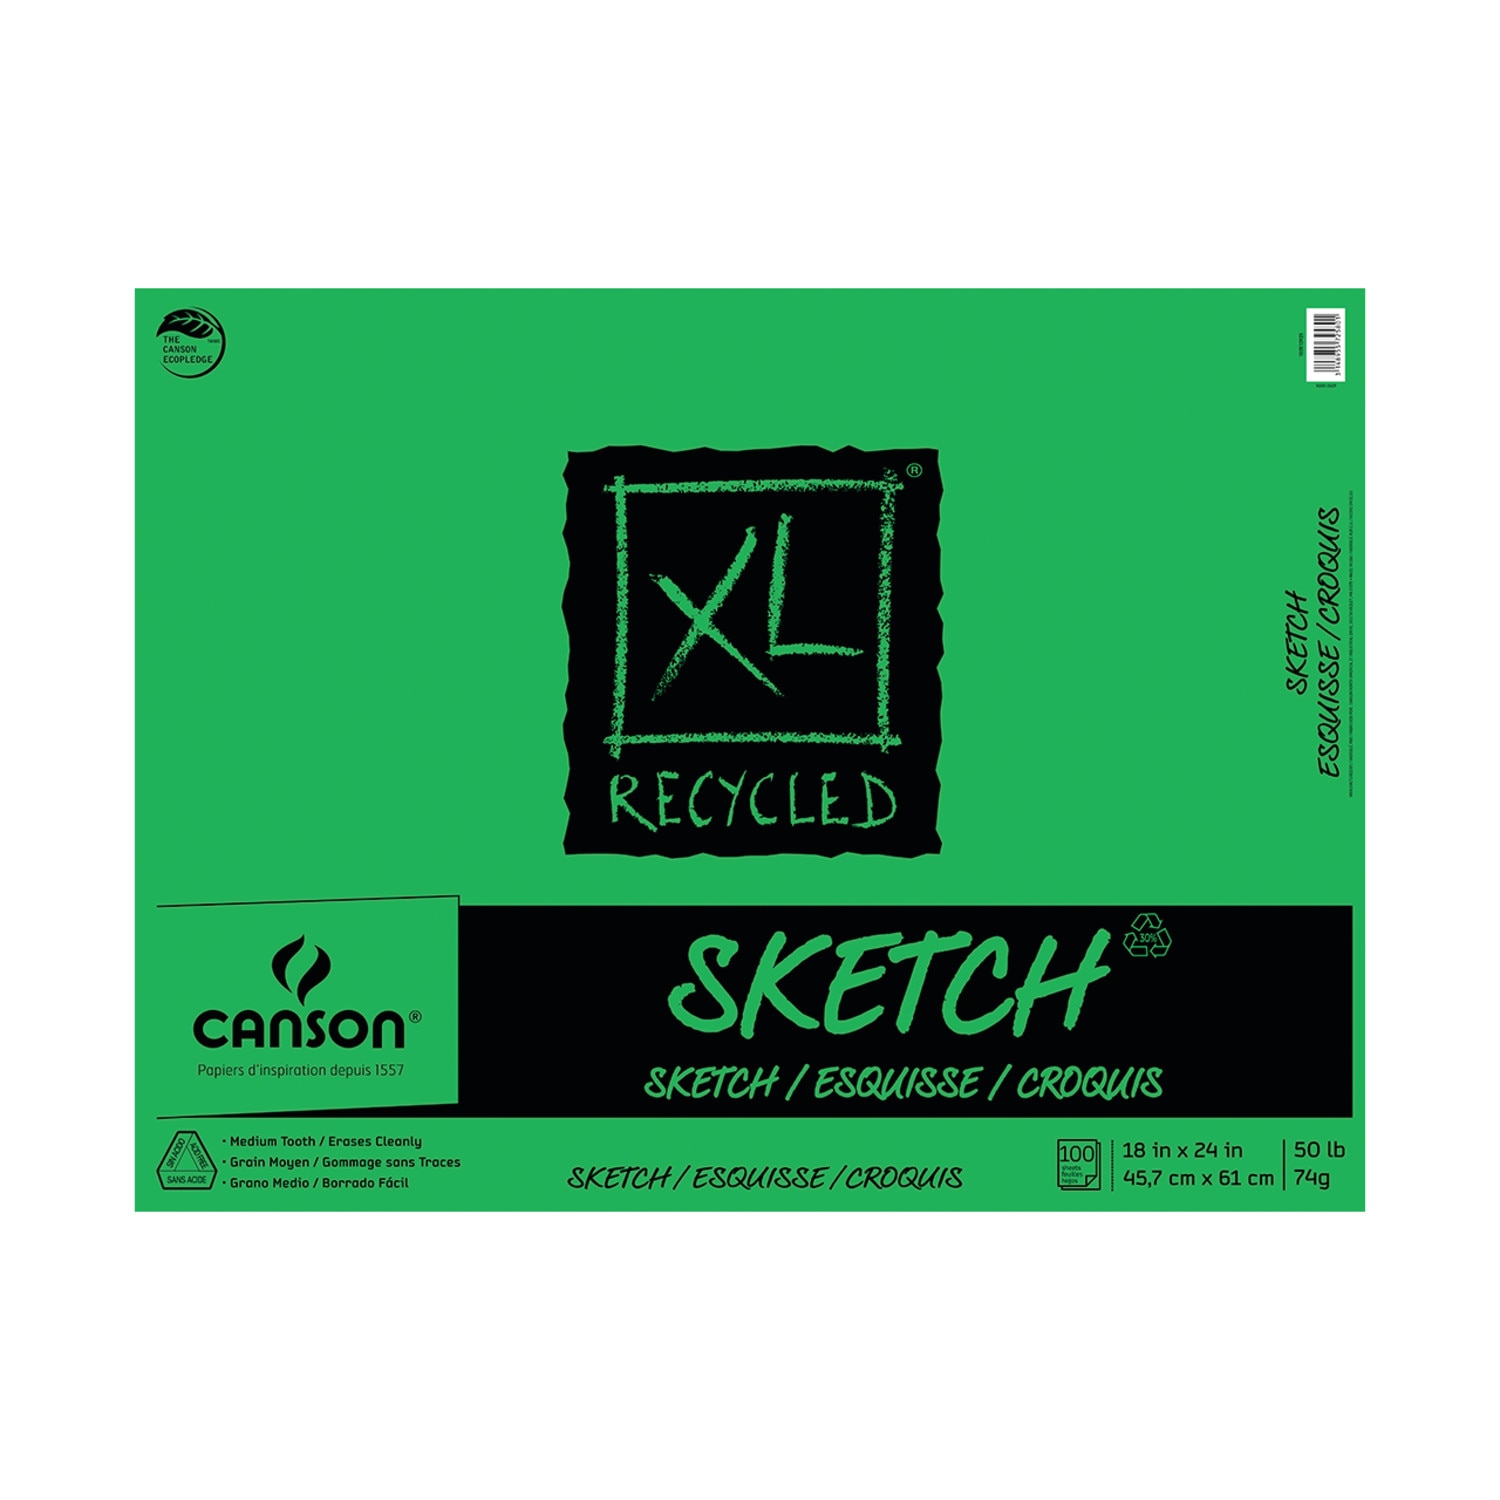 Canson XL Recycled Sketch Pad, 18" x 24", 100 Sheets